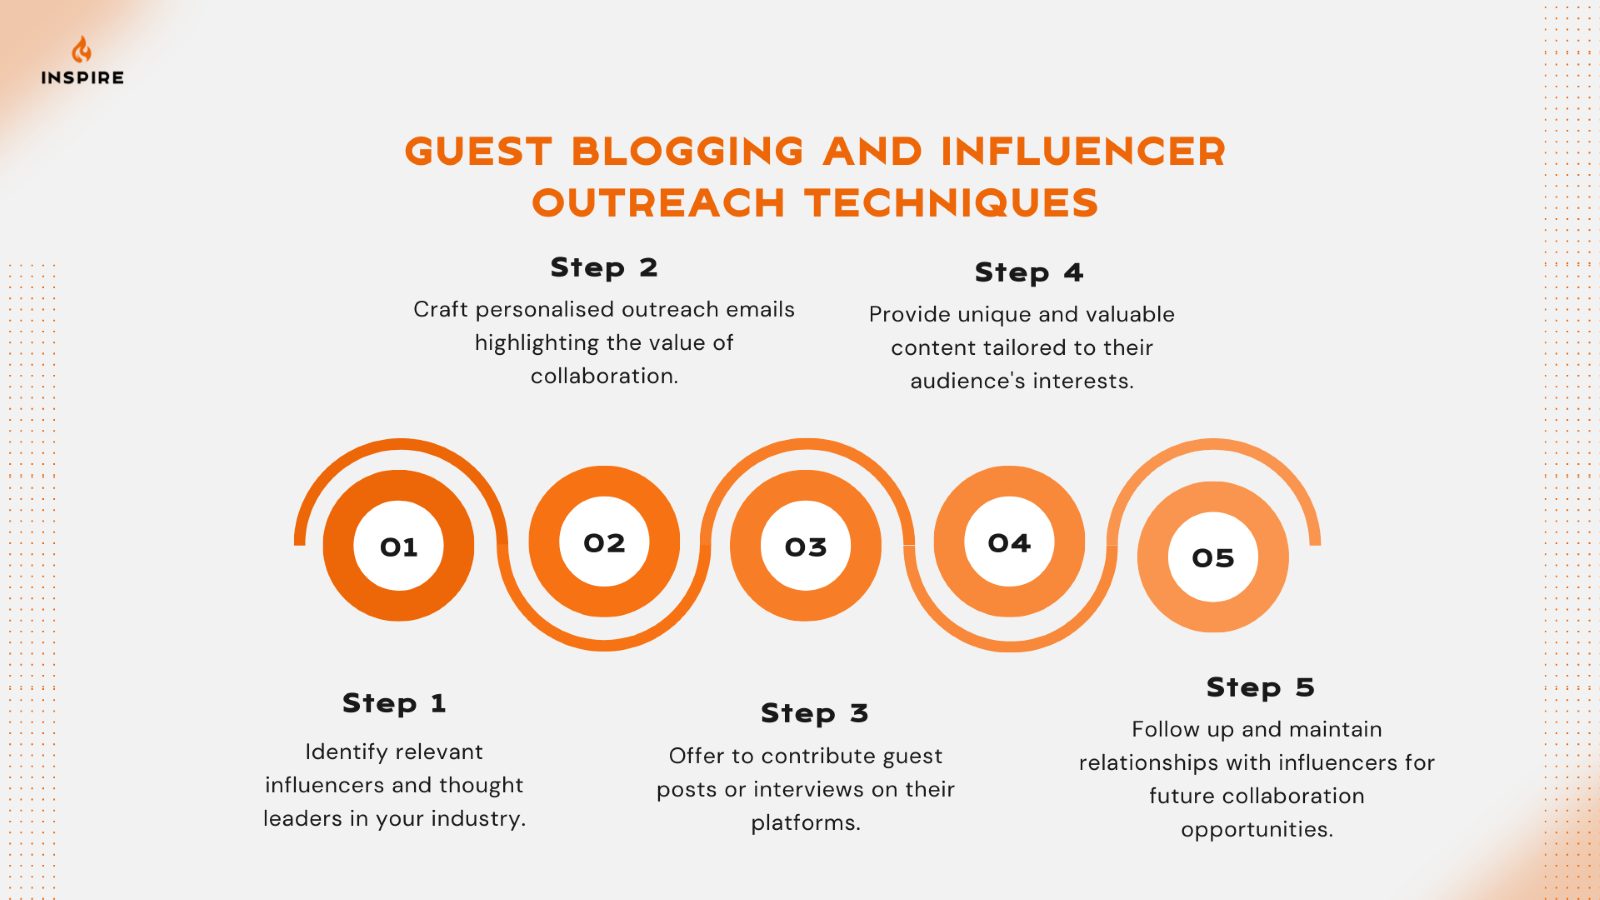 Guest blogging and influencer outreach techniques